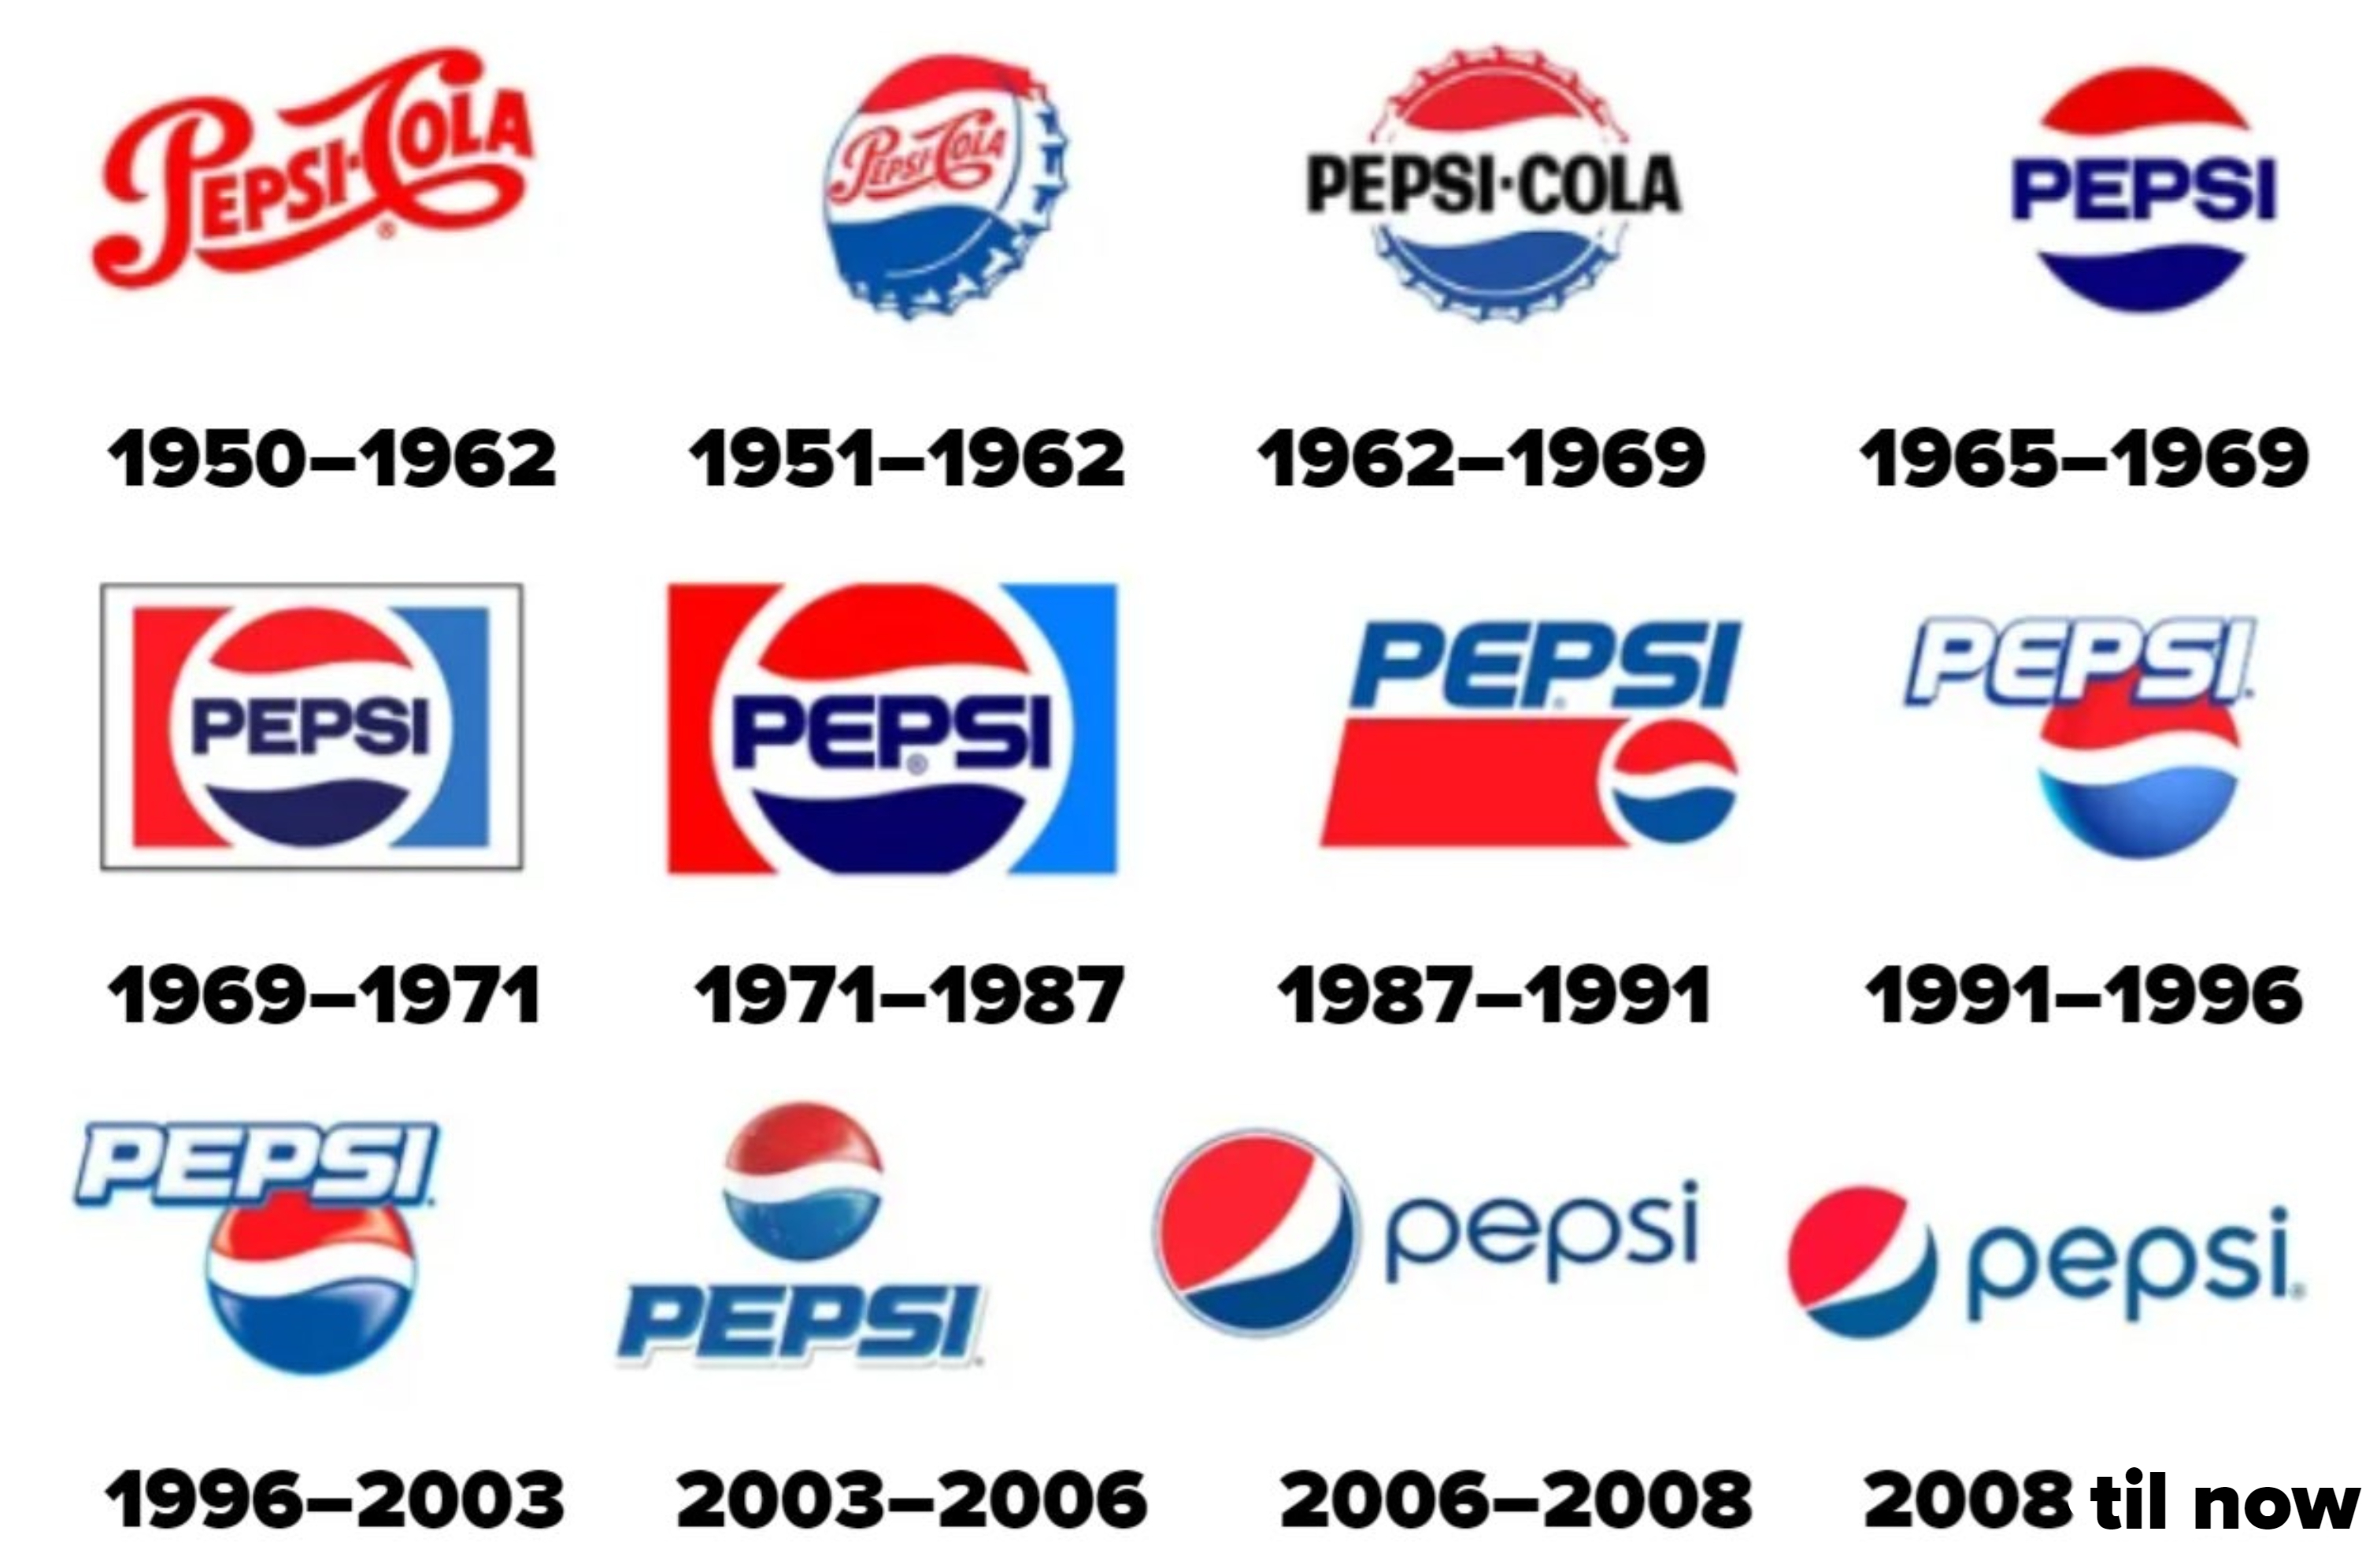 Evolution of Pepsi logo from 1950 to 2024, showcasing eleven different designs